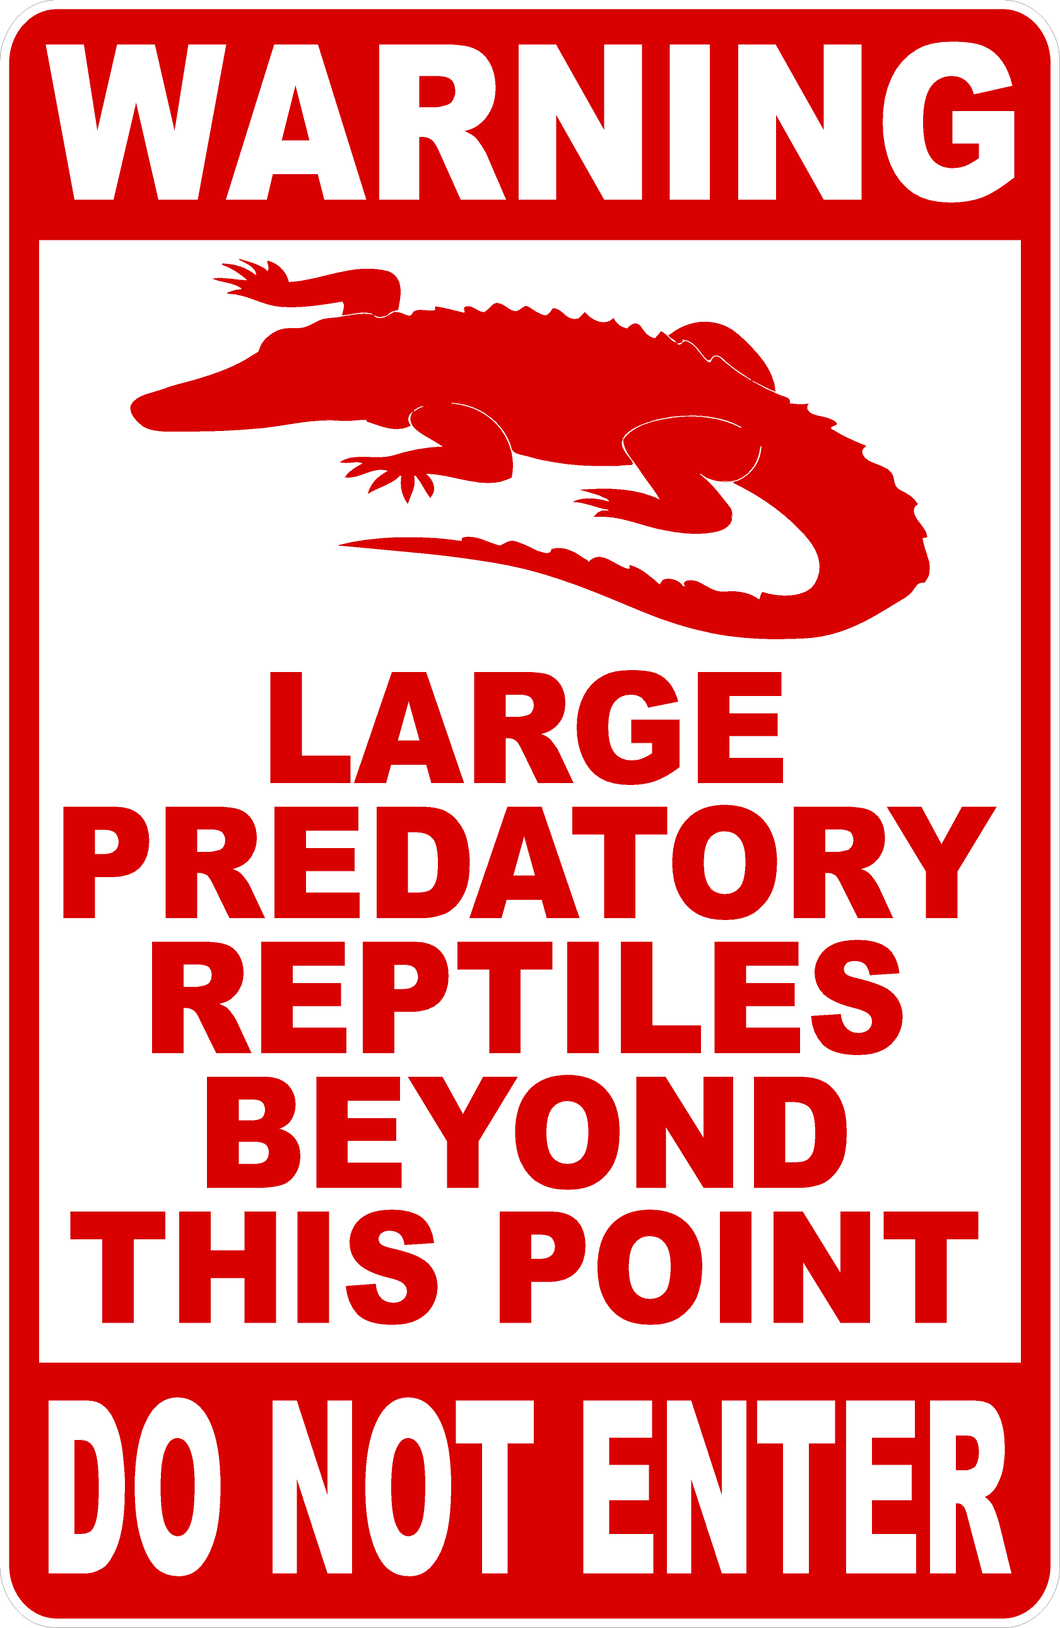 Warning Large Predatory Reptiles Beyond This Point Do Not Enter Sign